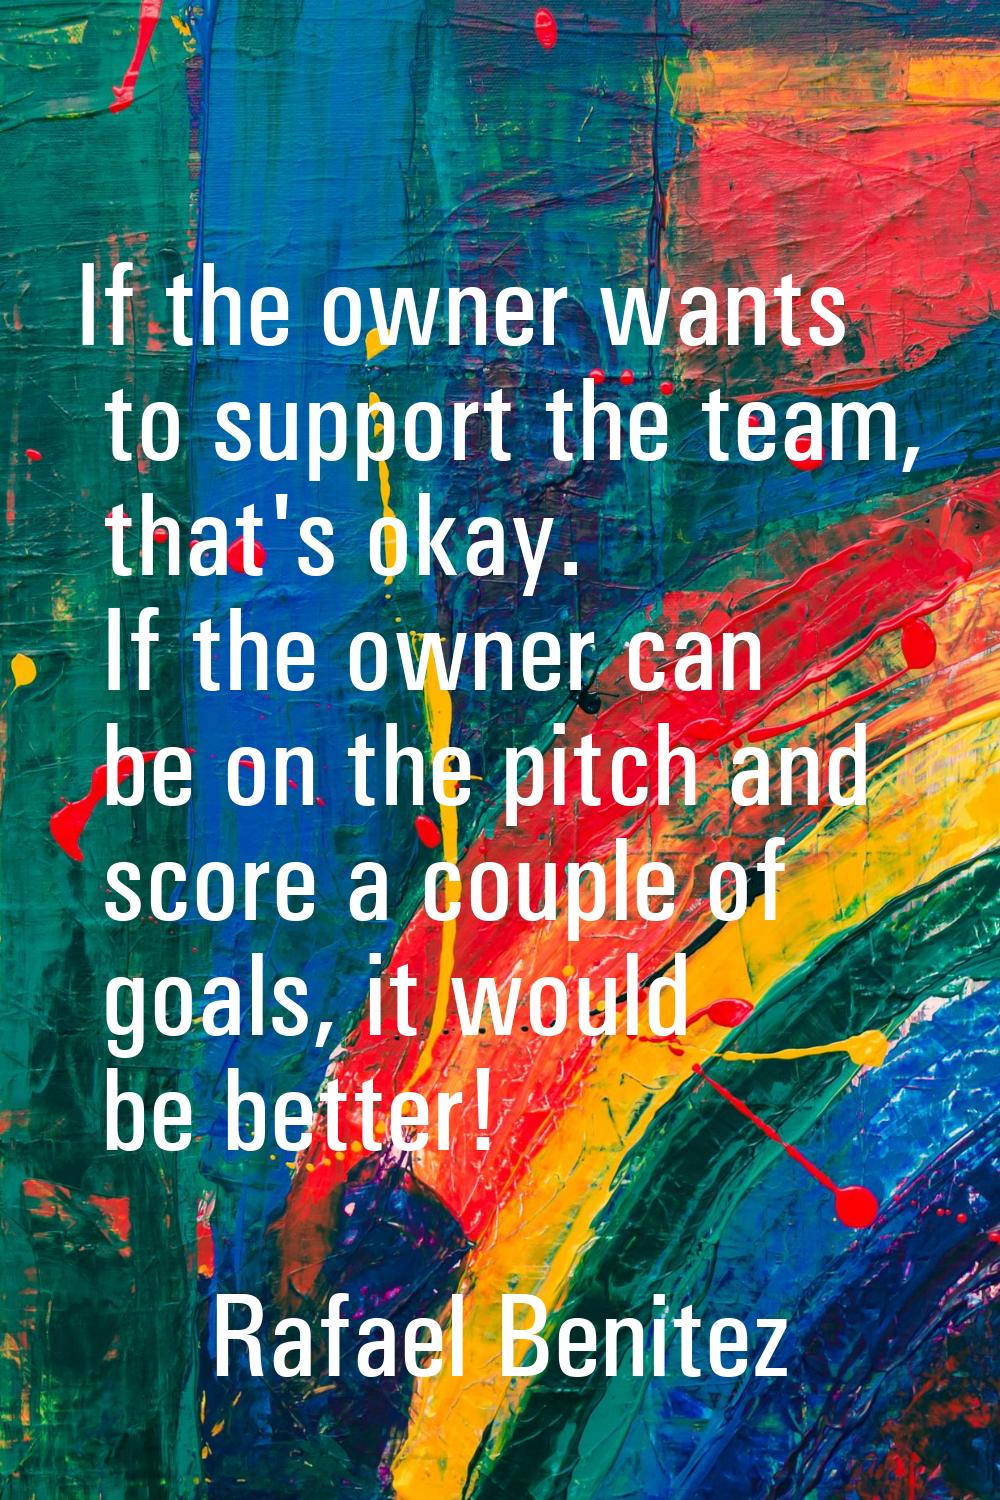 If the owner wants to support the team, that's okay. If the owner can be on the pitch and score a c